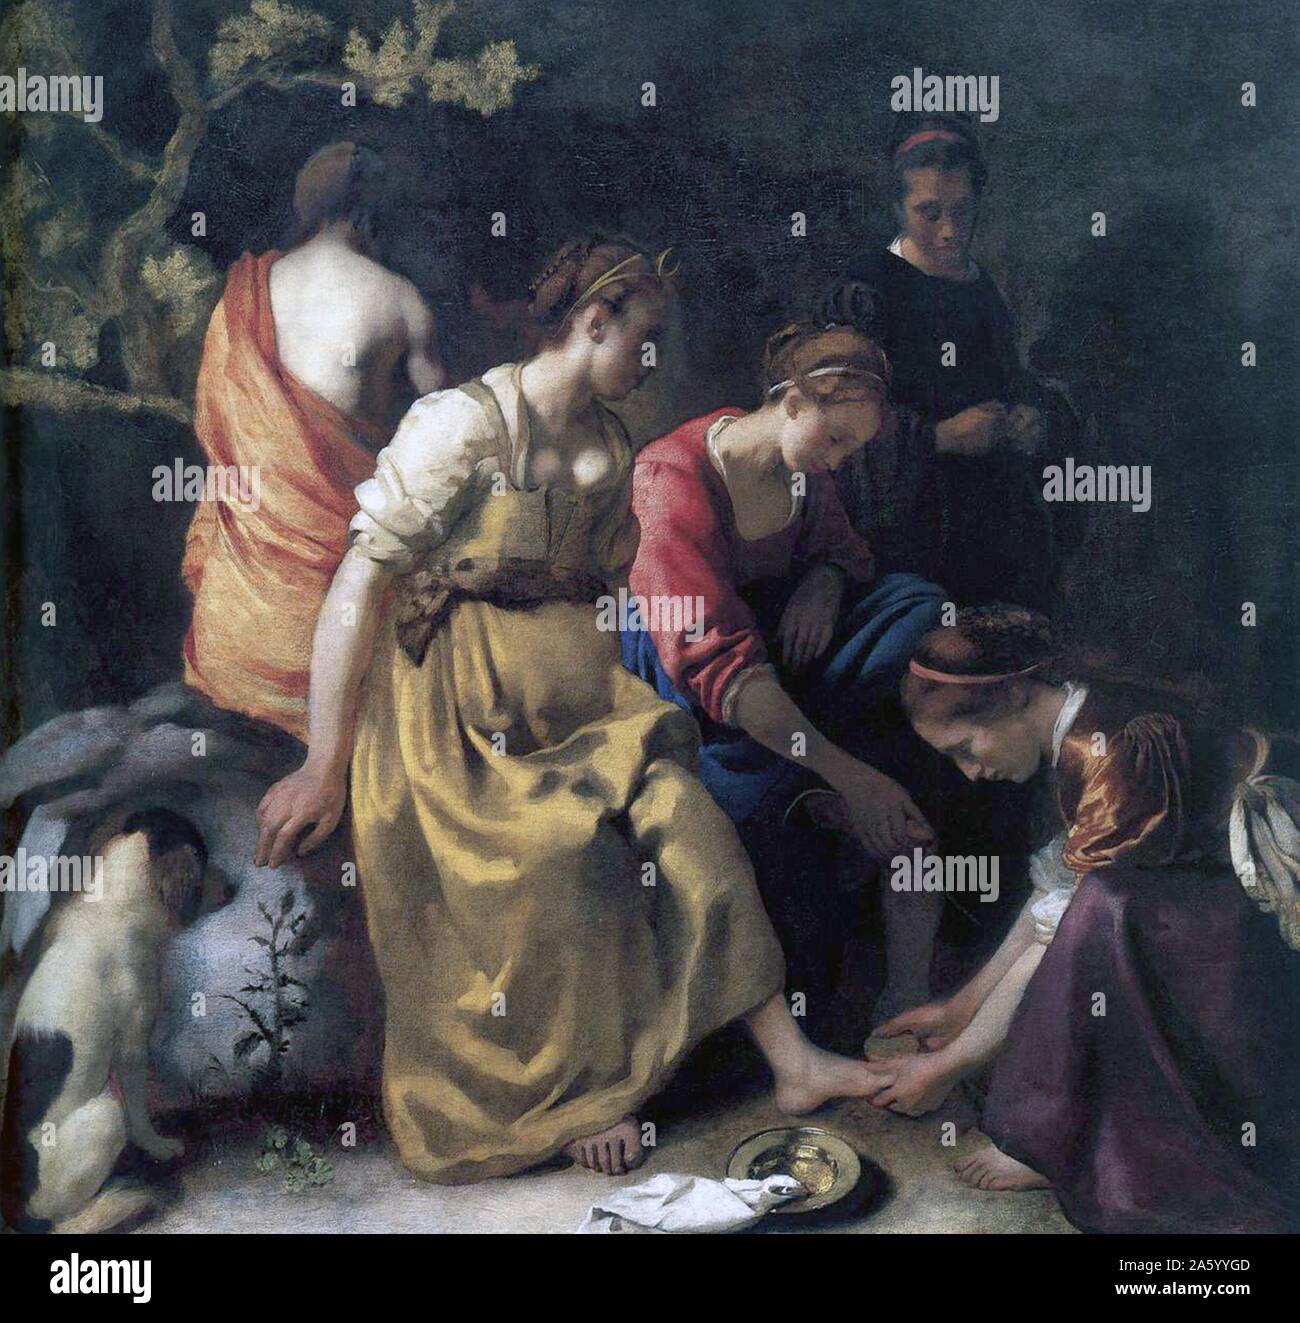 Diana and her Companions' by Johannes Vermeer (1632-1675), 1656. Oil on canvas. Stock Photo